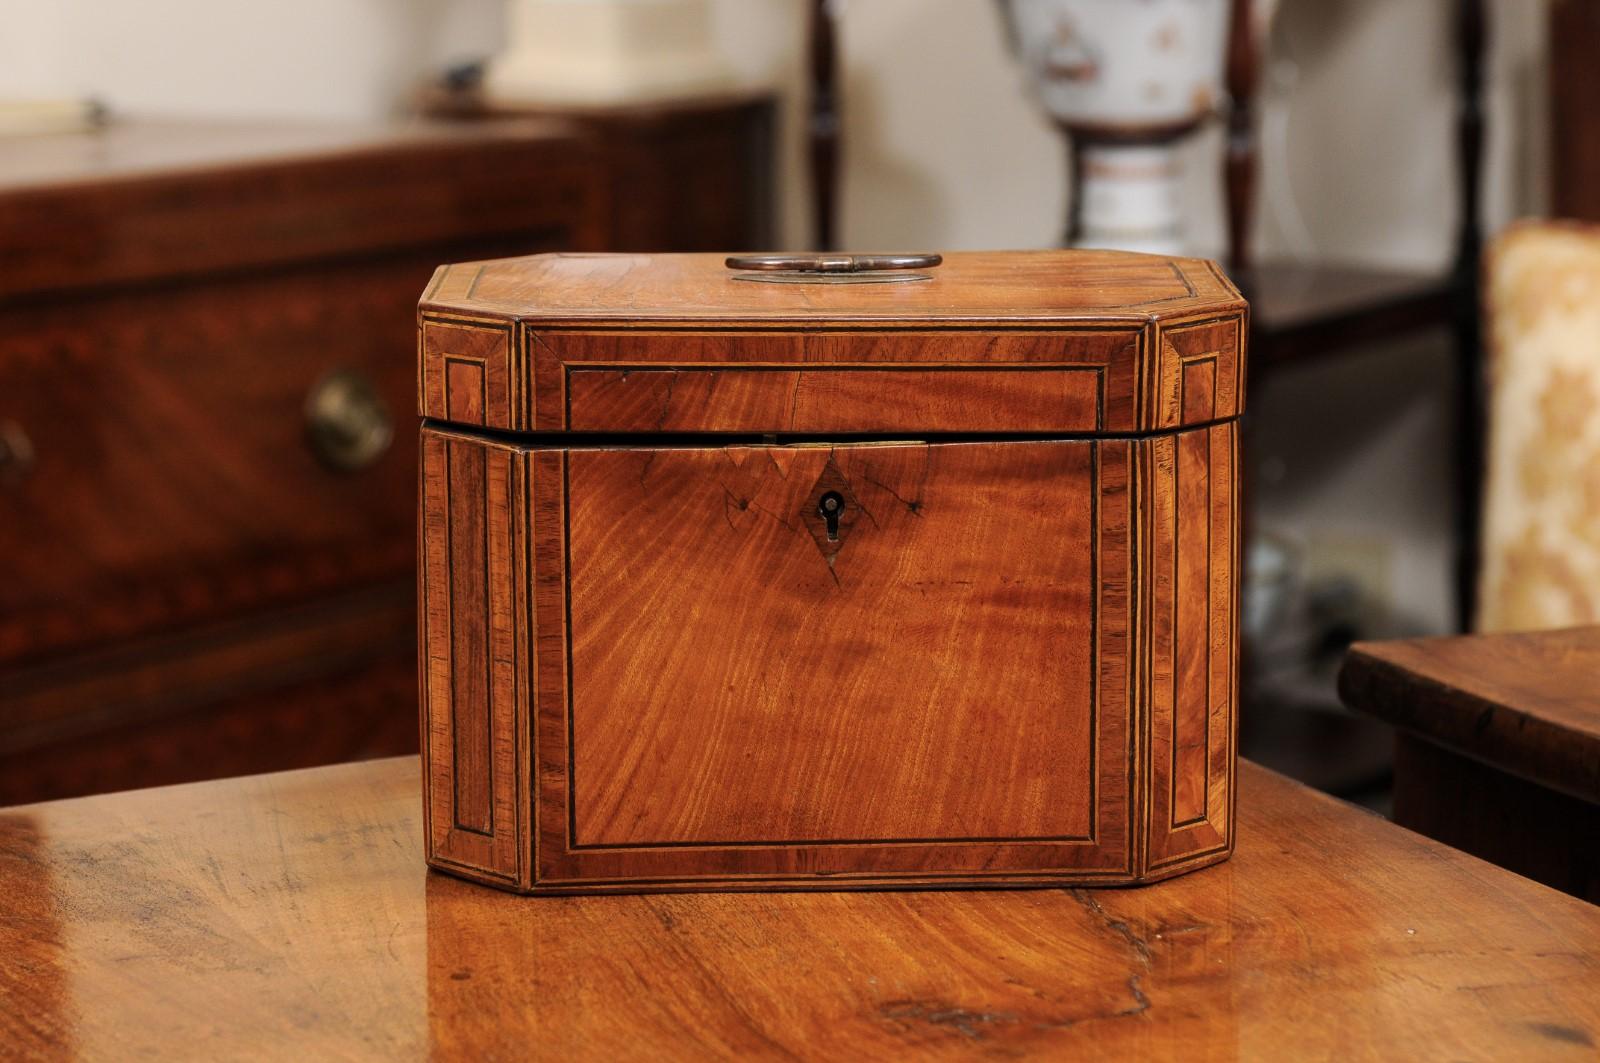  English Octagonal Satinwood Tea Caddy with Rosewood Cross Banding  For Sale 7